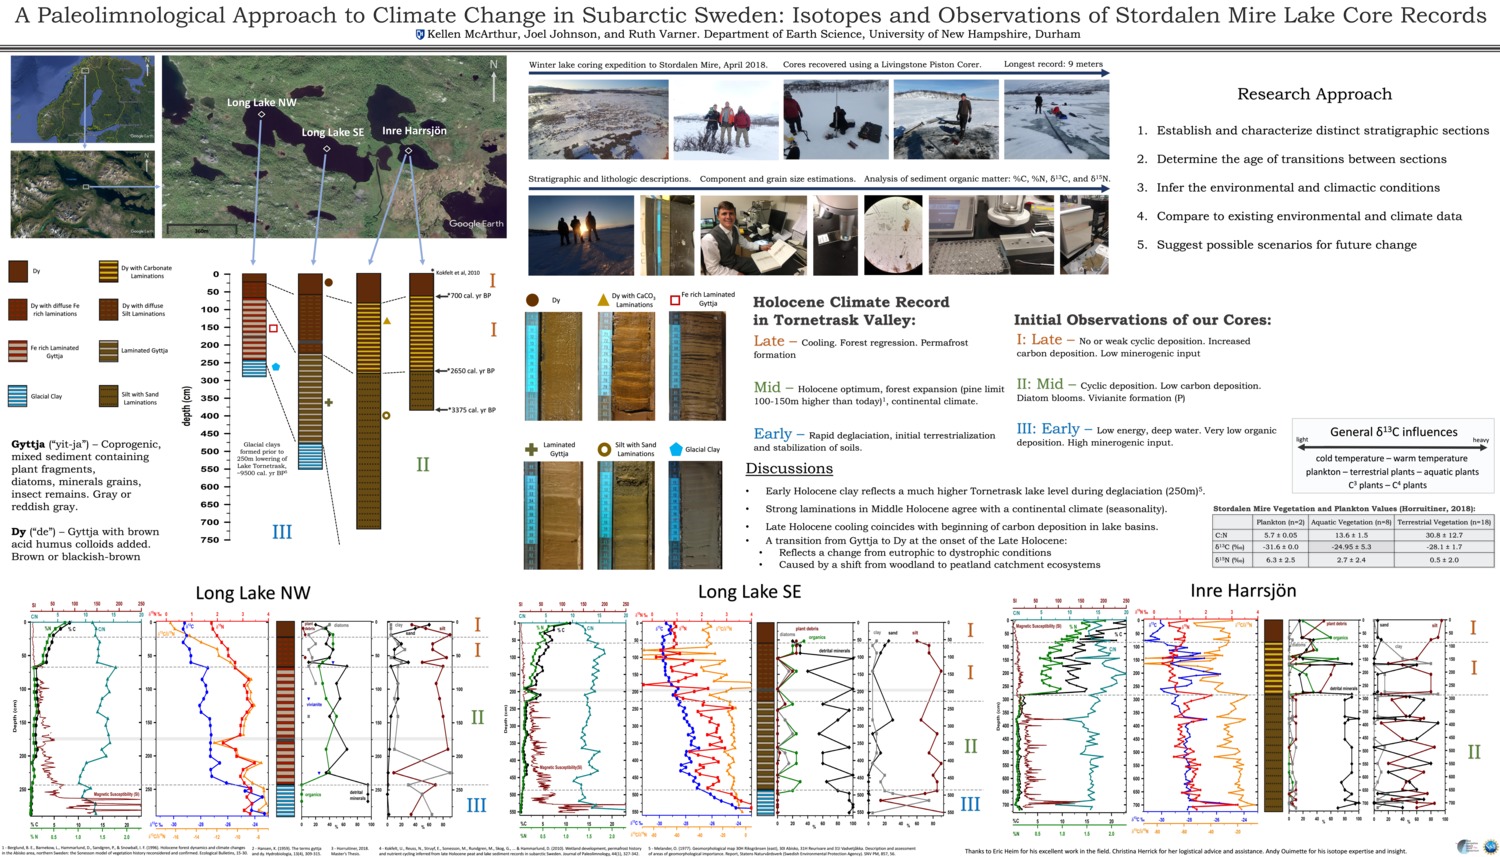 A Paleolimnological Approach To Climate Change In Subarctic Sweden by kellenmcarthur